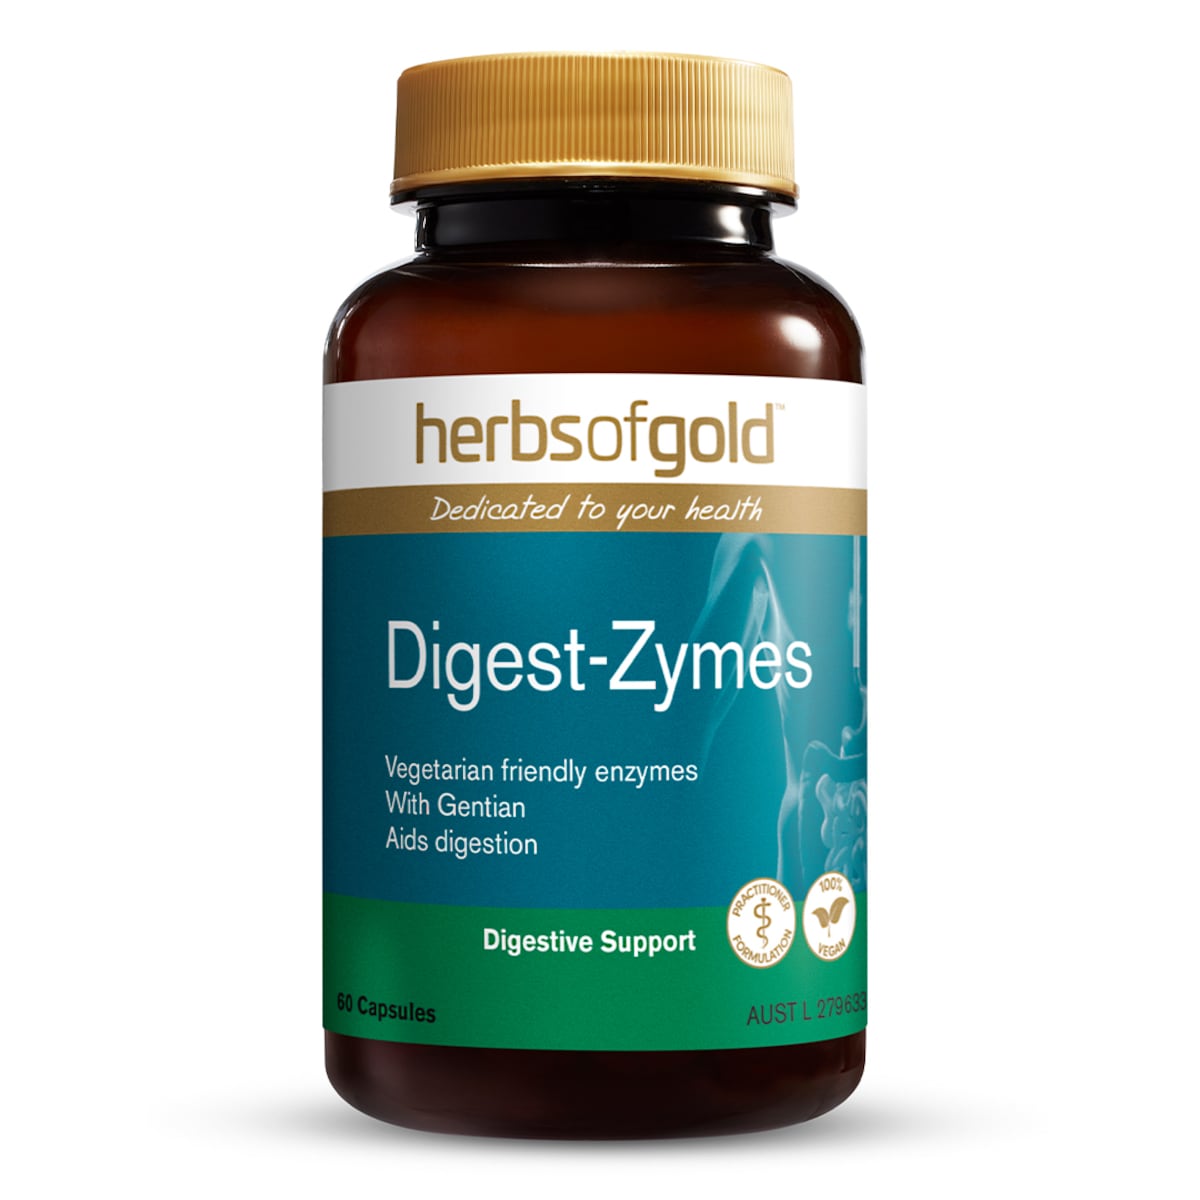 Herbs of Gold Digest-Zymes 60 Capsules Australia